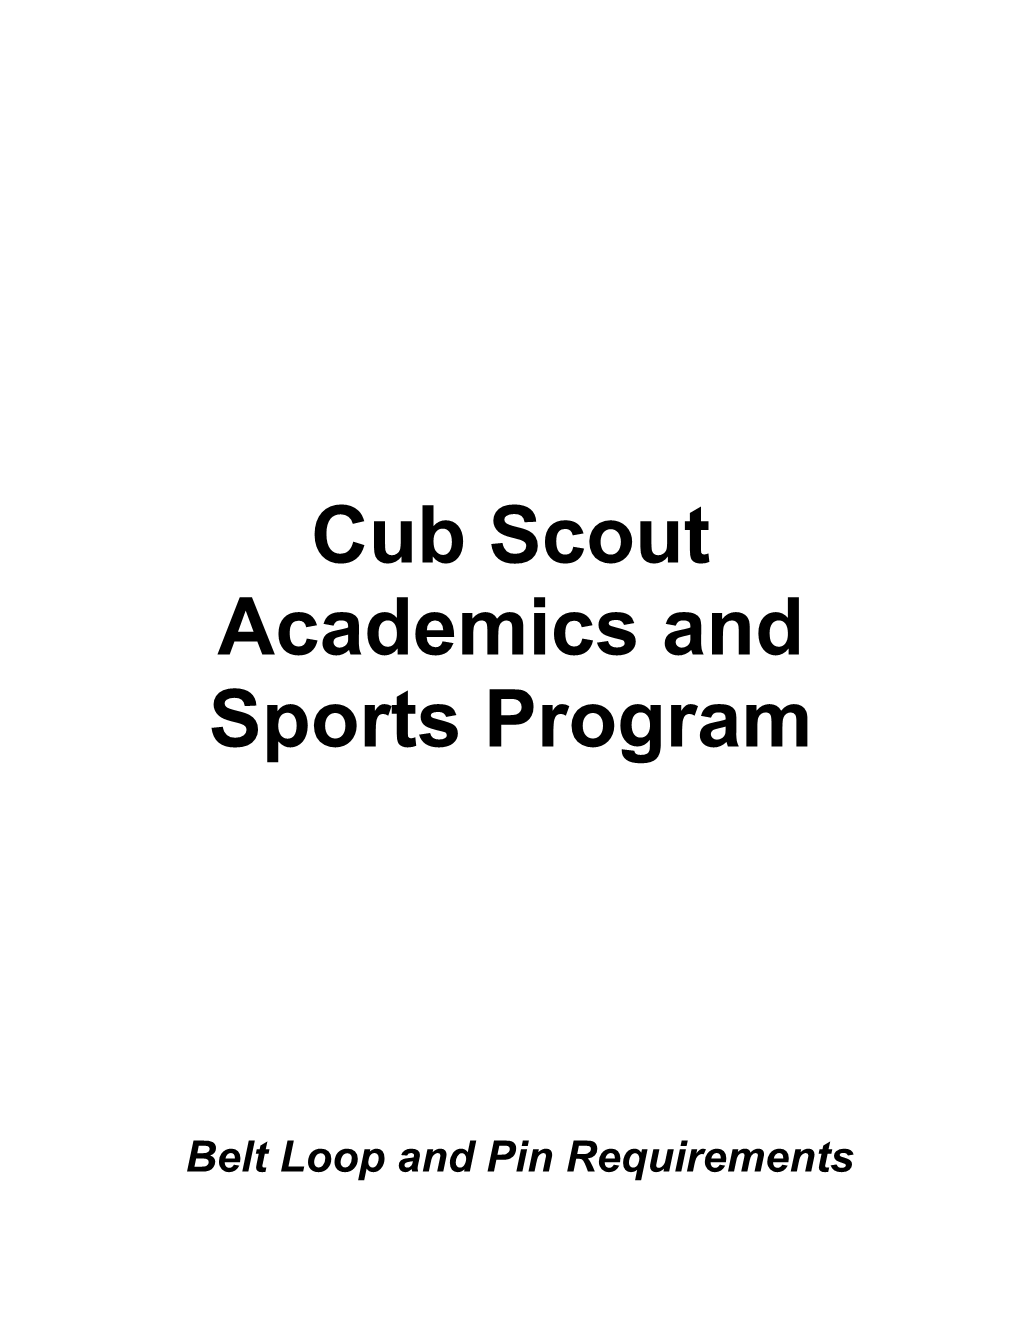 Cub Scout Belt Loop and Pin Requirements